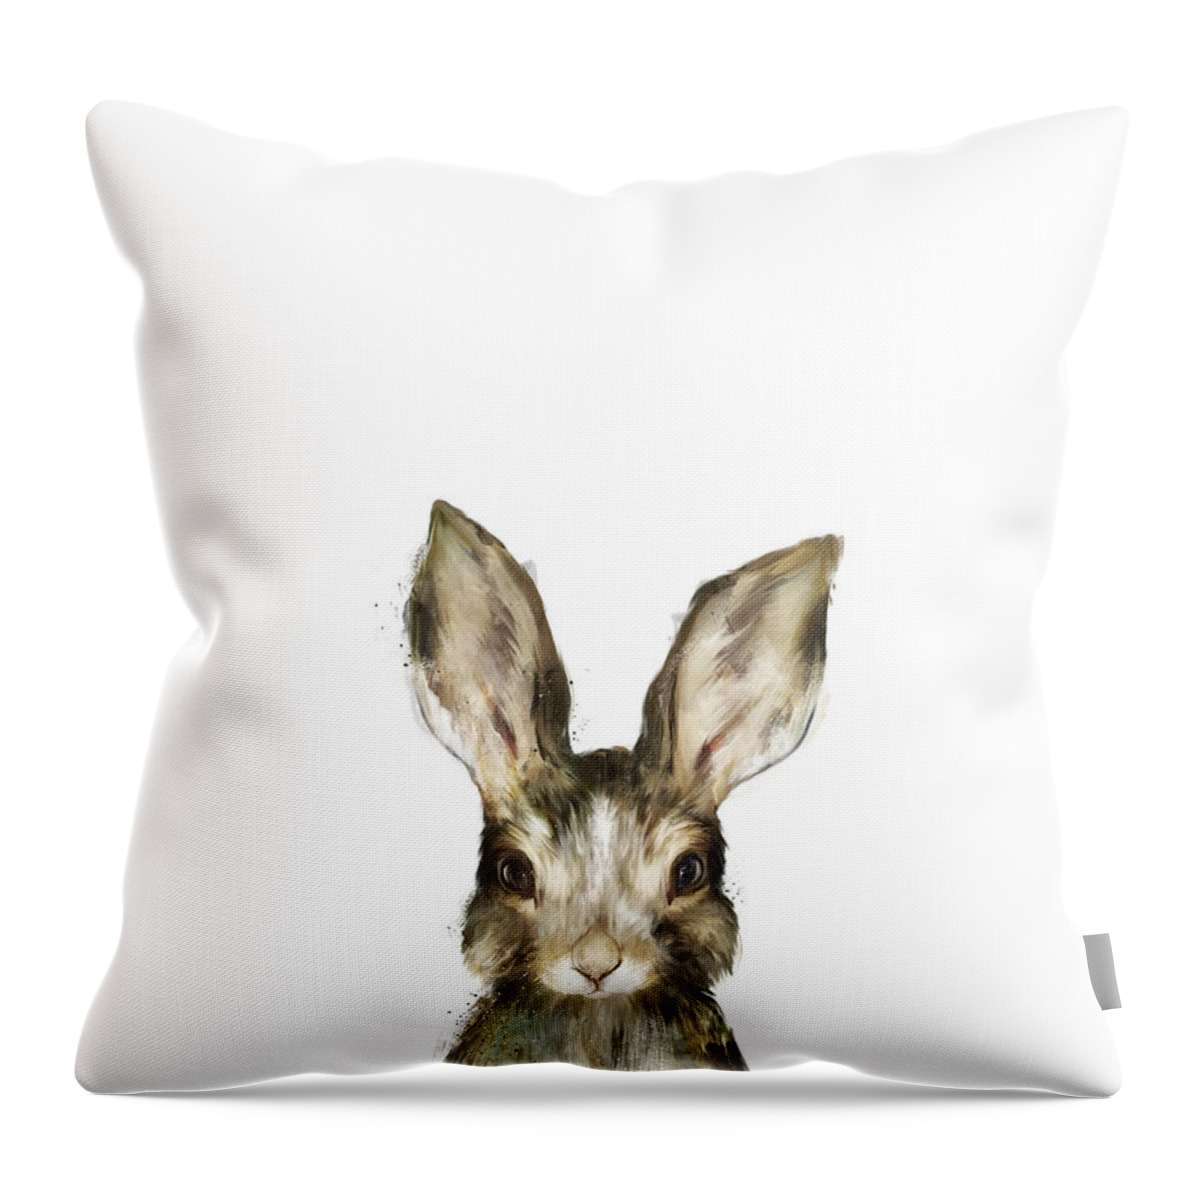 #faatoppicks Throw Pillow featuring the painting Little Rabbit by Amy Hamilton